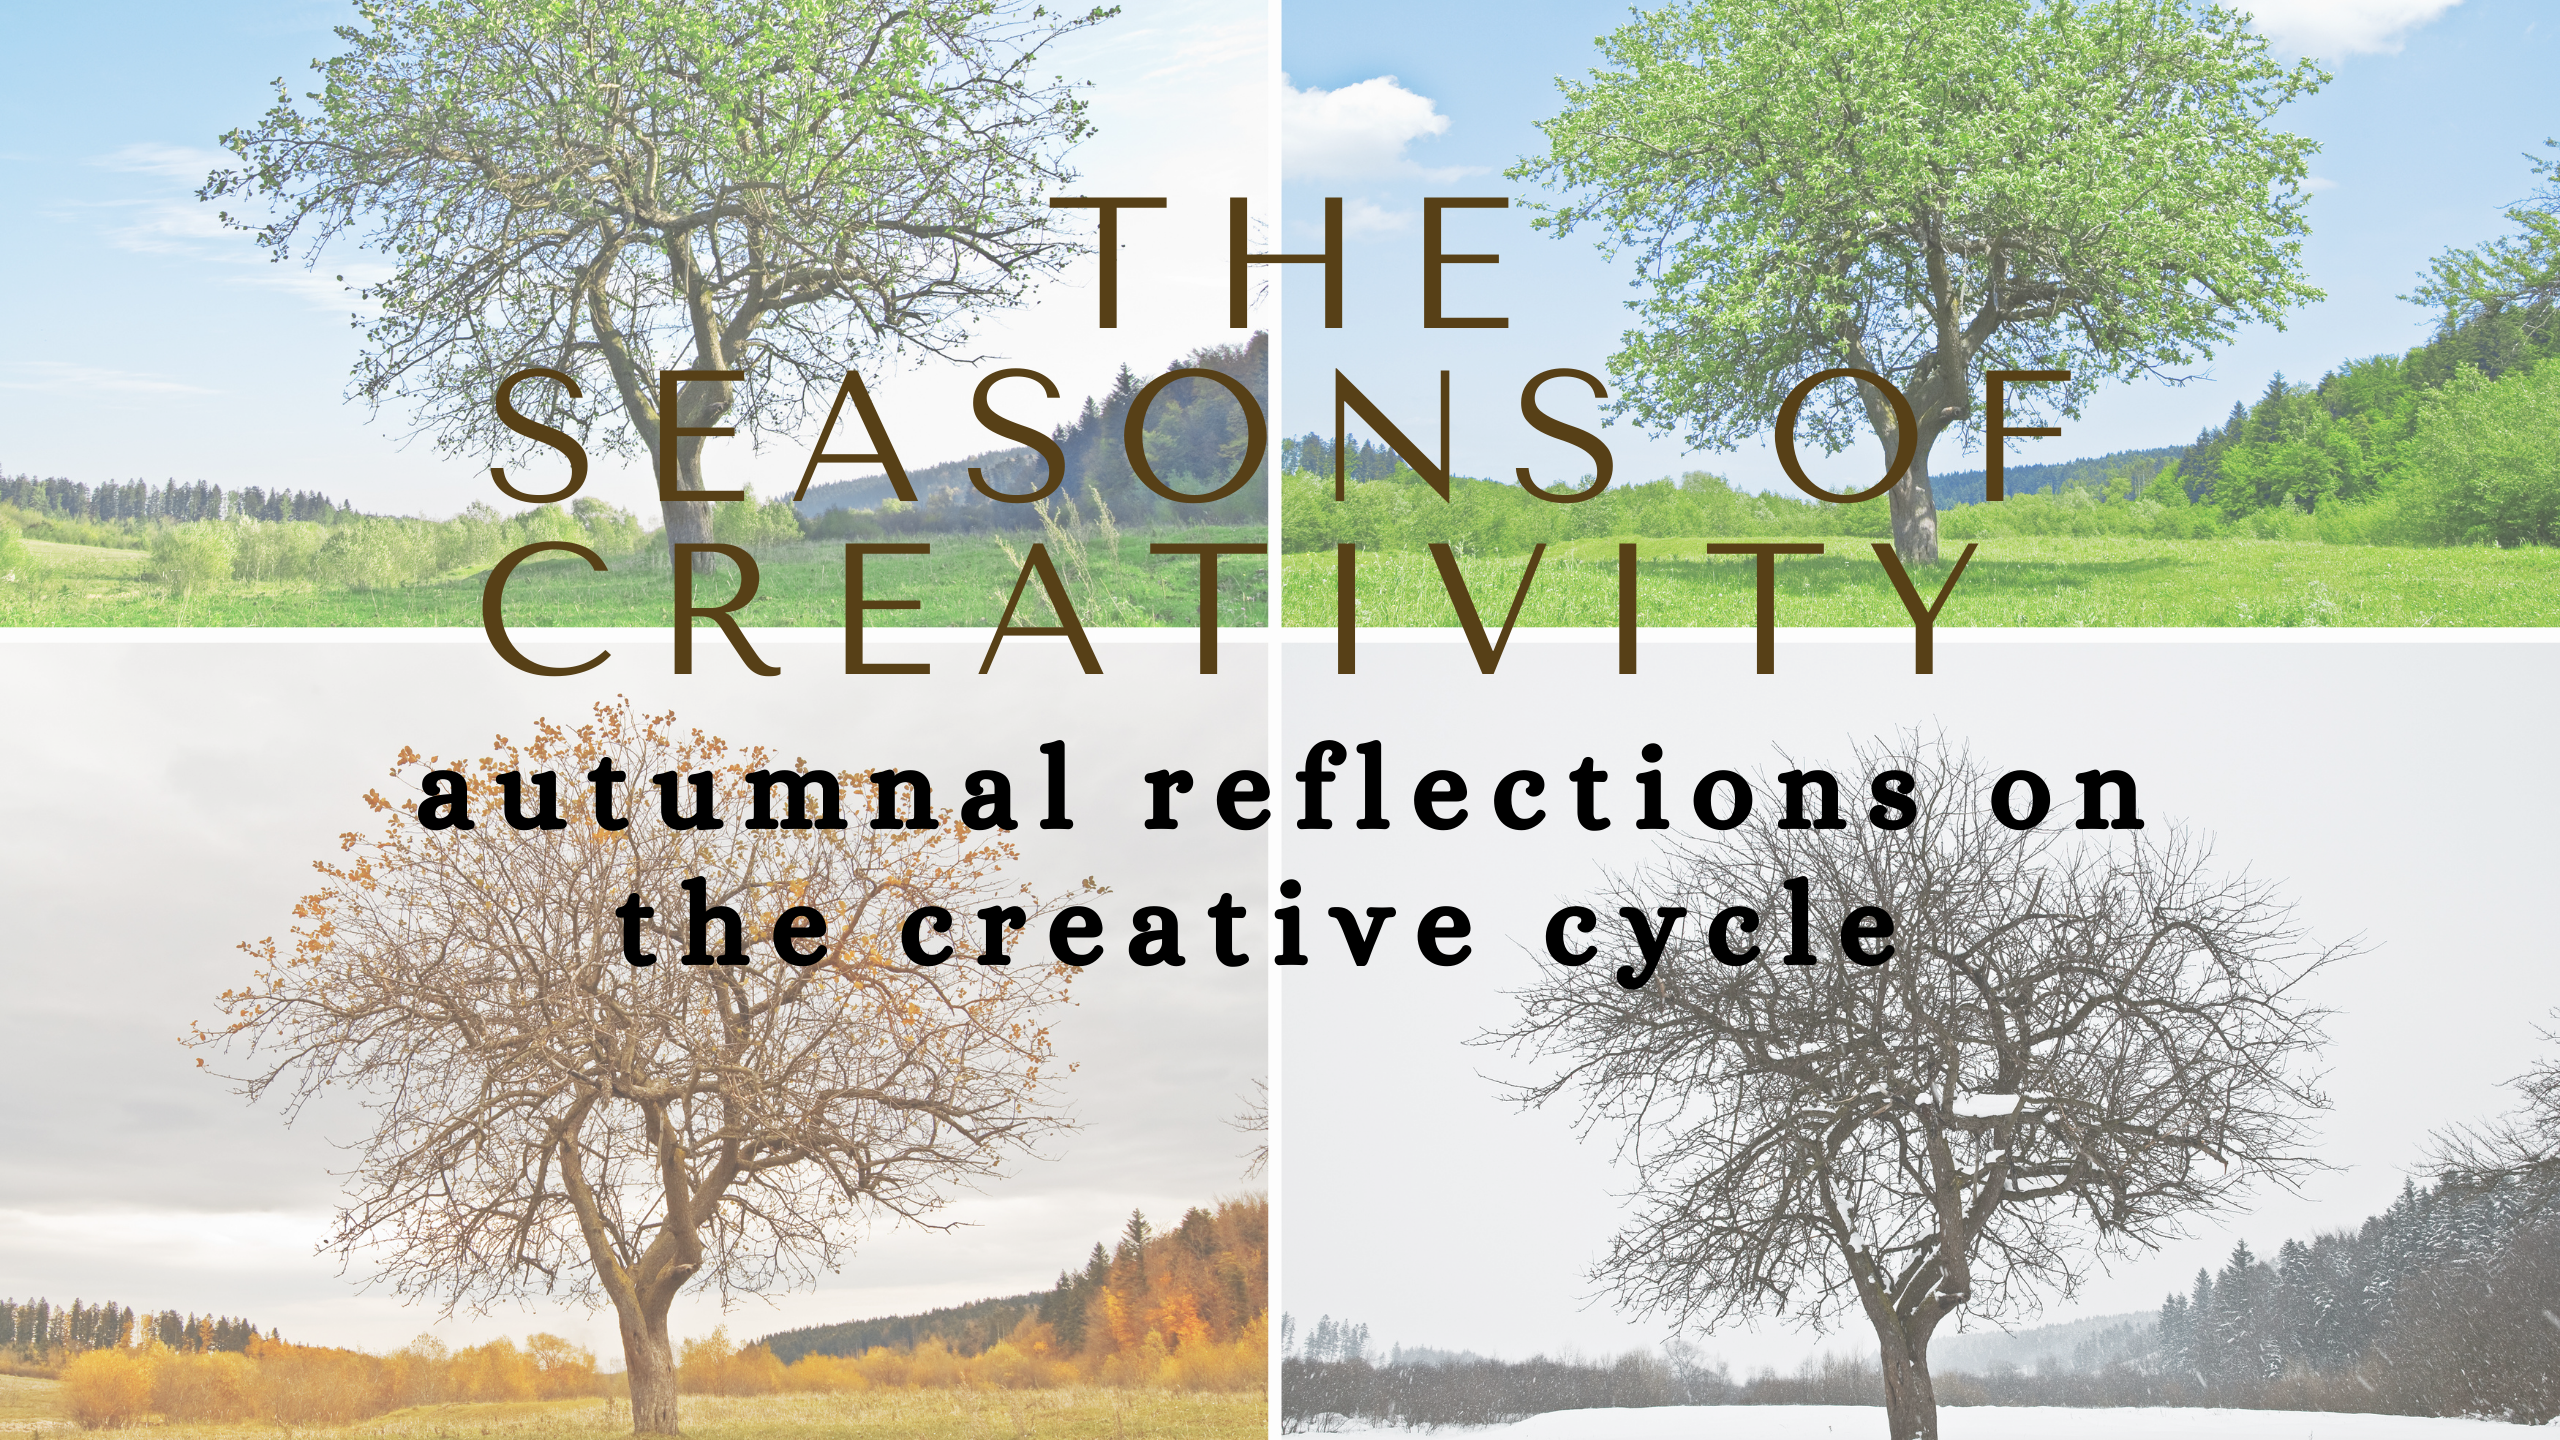 picture of a tree in the four seasons with text overlay that reads "The Seasons of Creativity: Autumnal Reflections on the Creative Cycle"